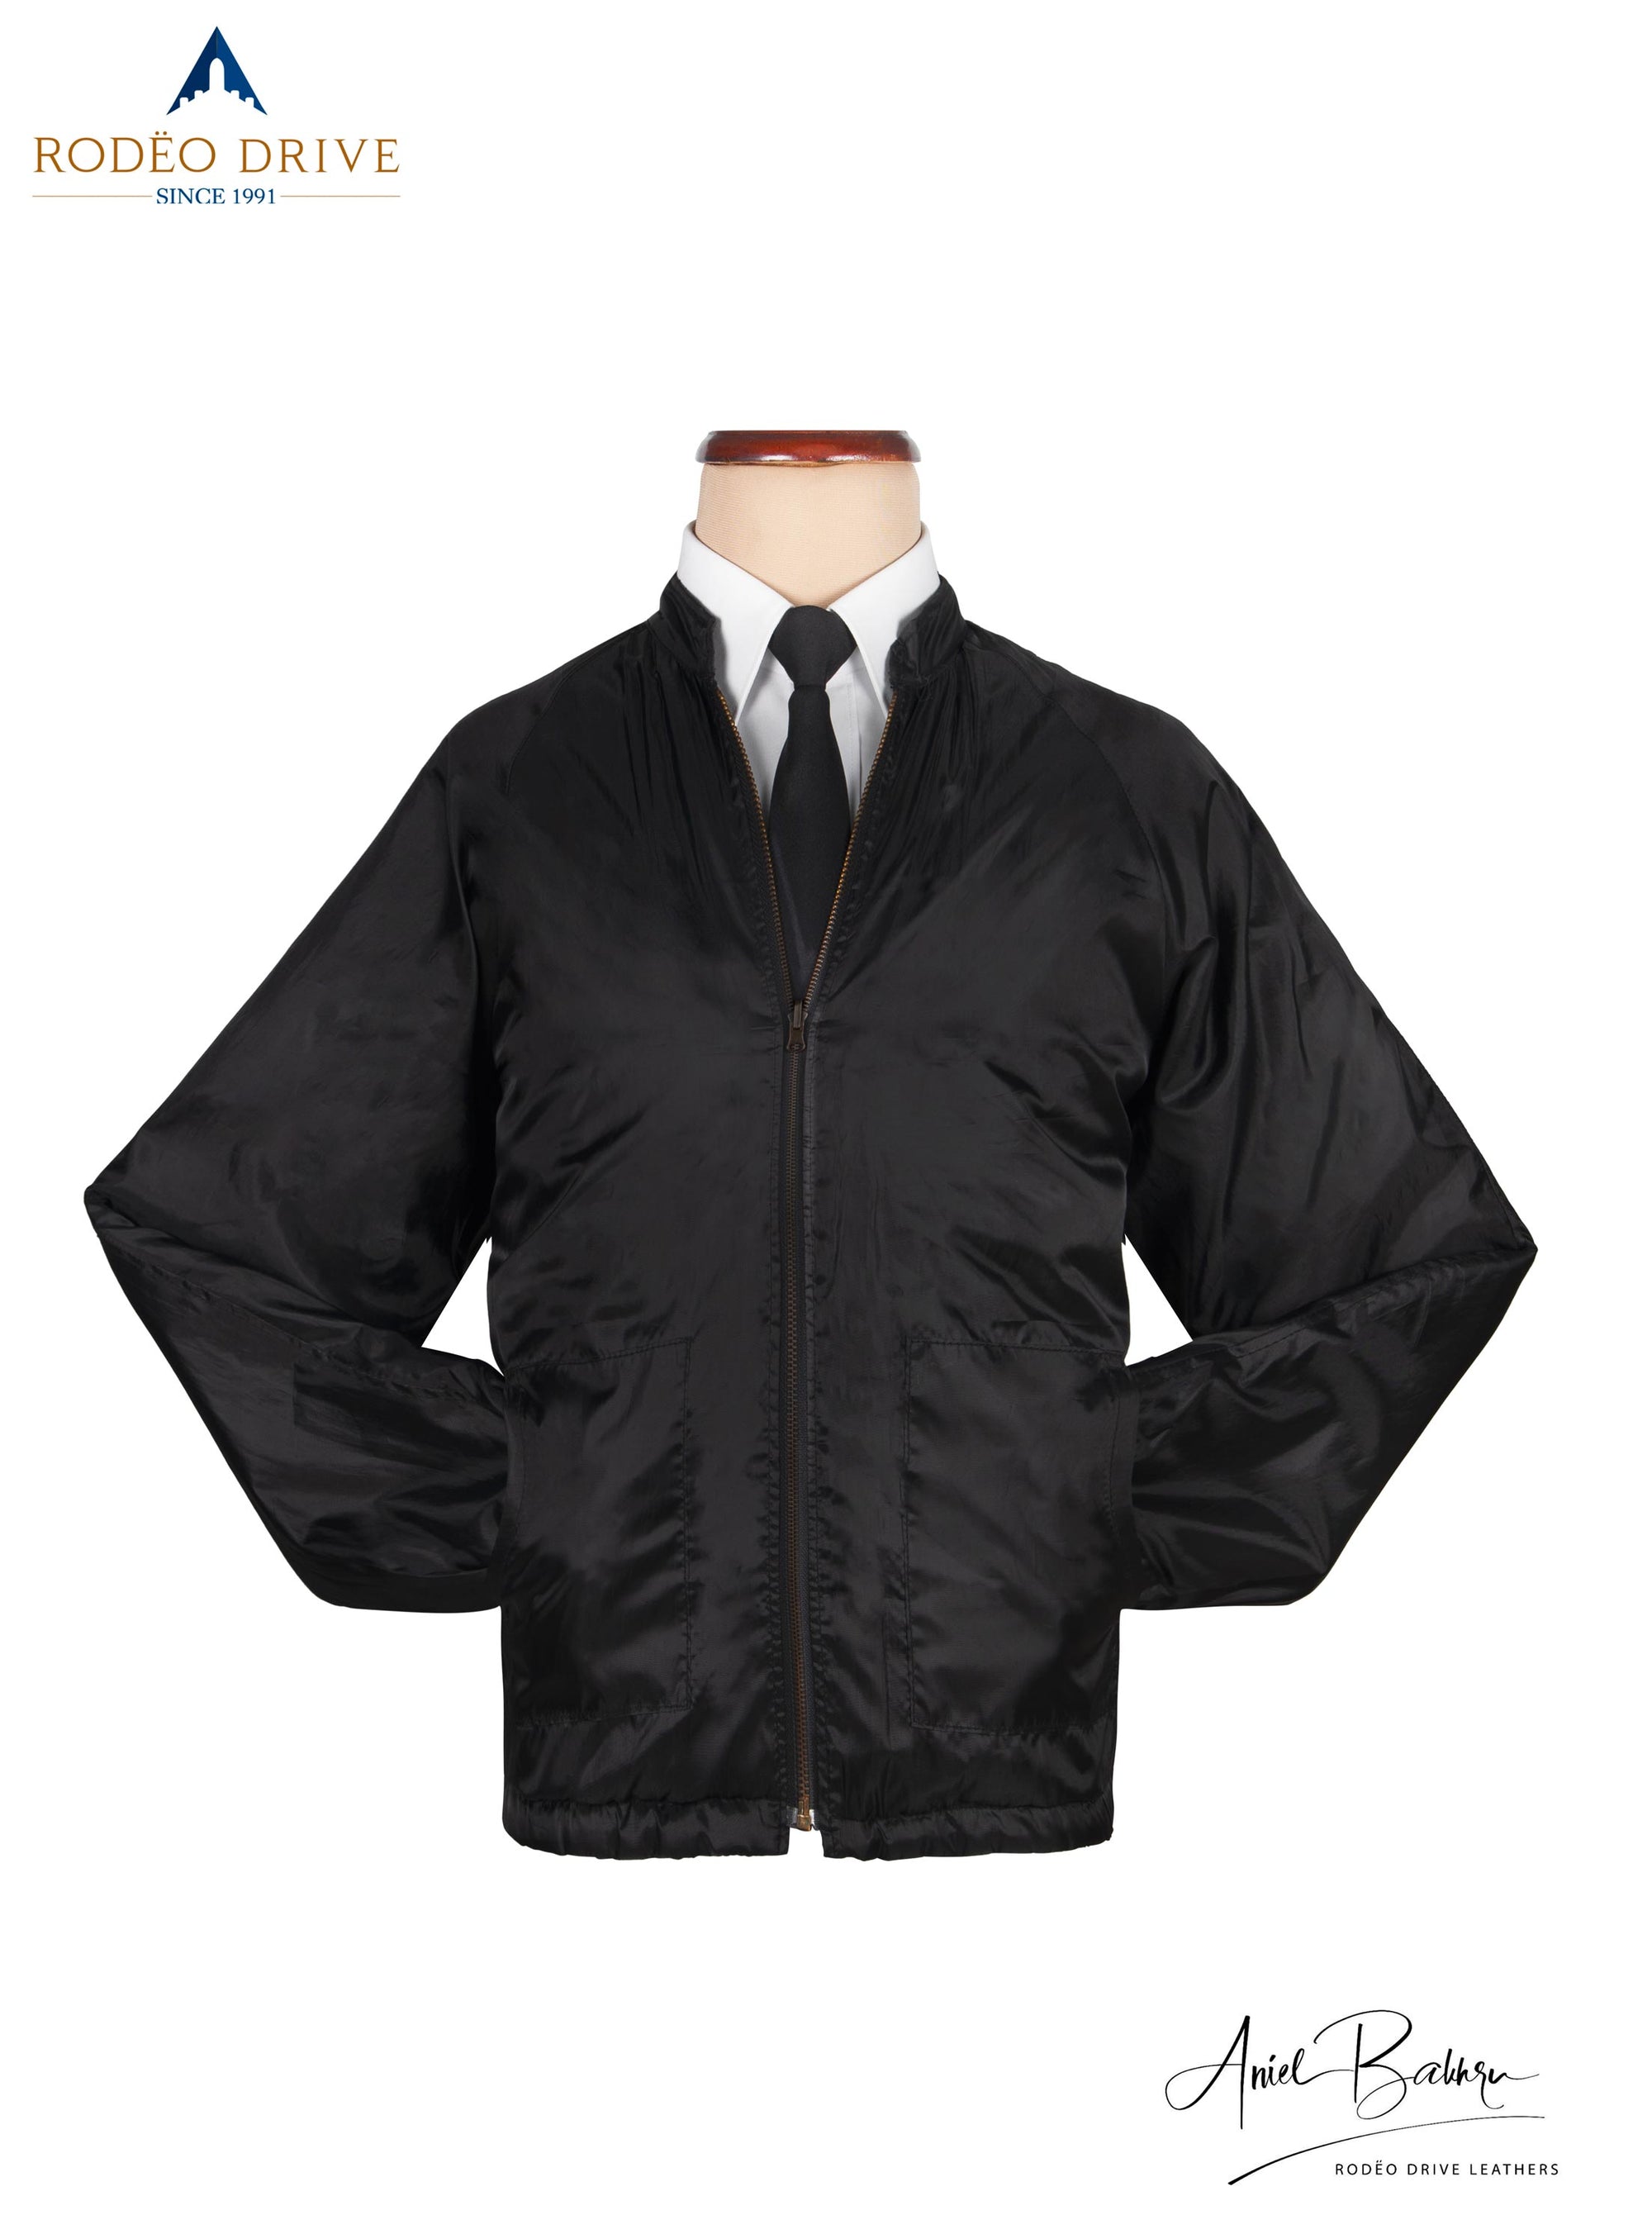 Image of plane black leather Jacket displayed on mannequin. A white shirt and neck tie is tucked in. Both the hands are tucked inside slit pockets. Classic way to wear the jacket